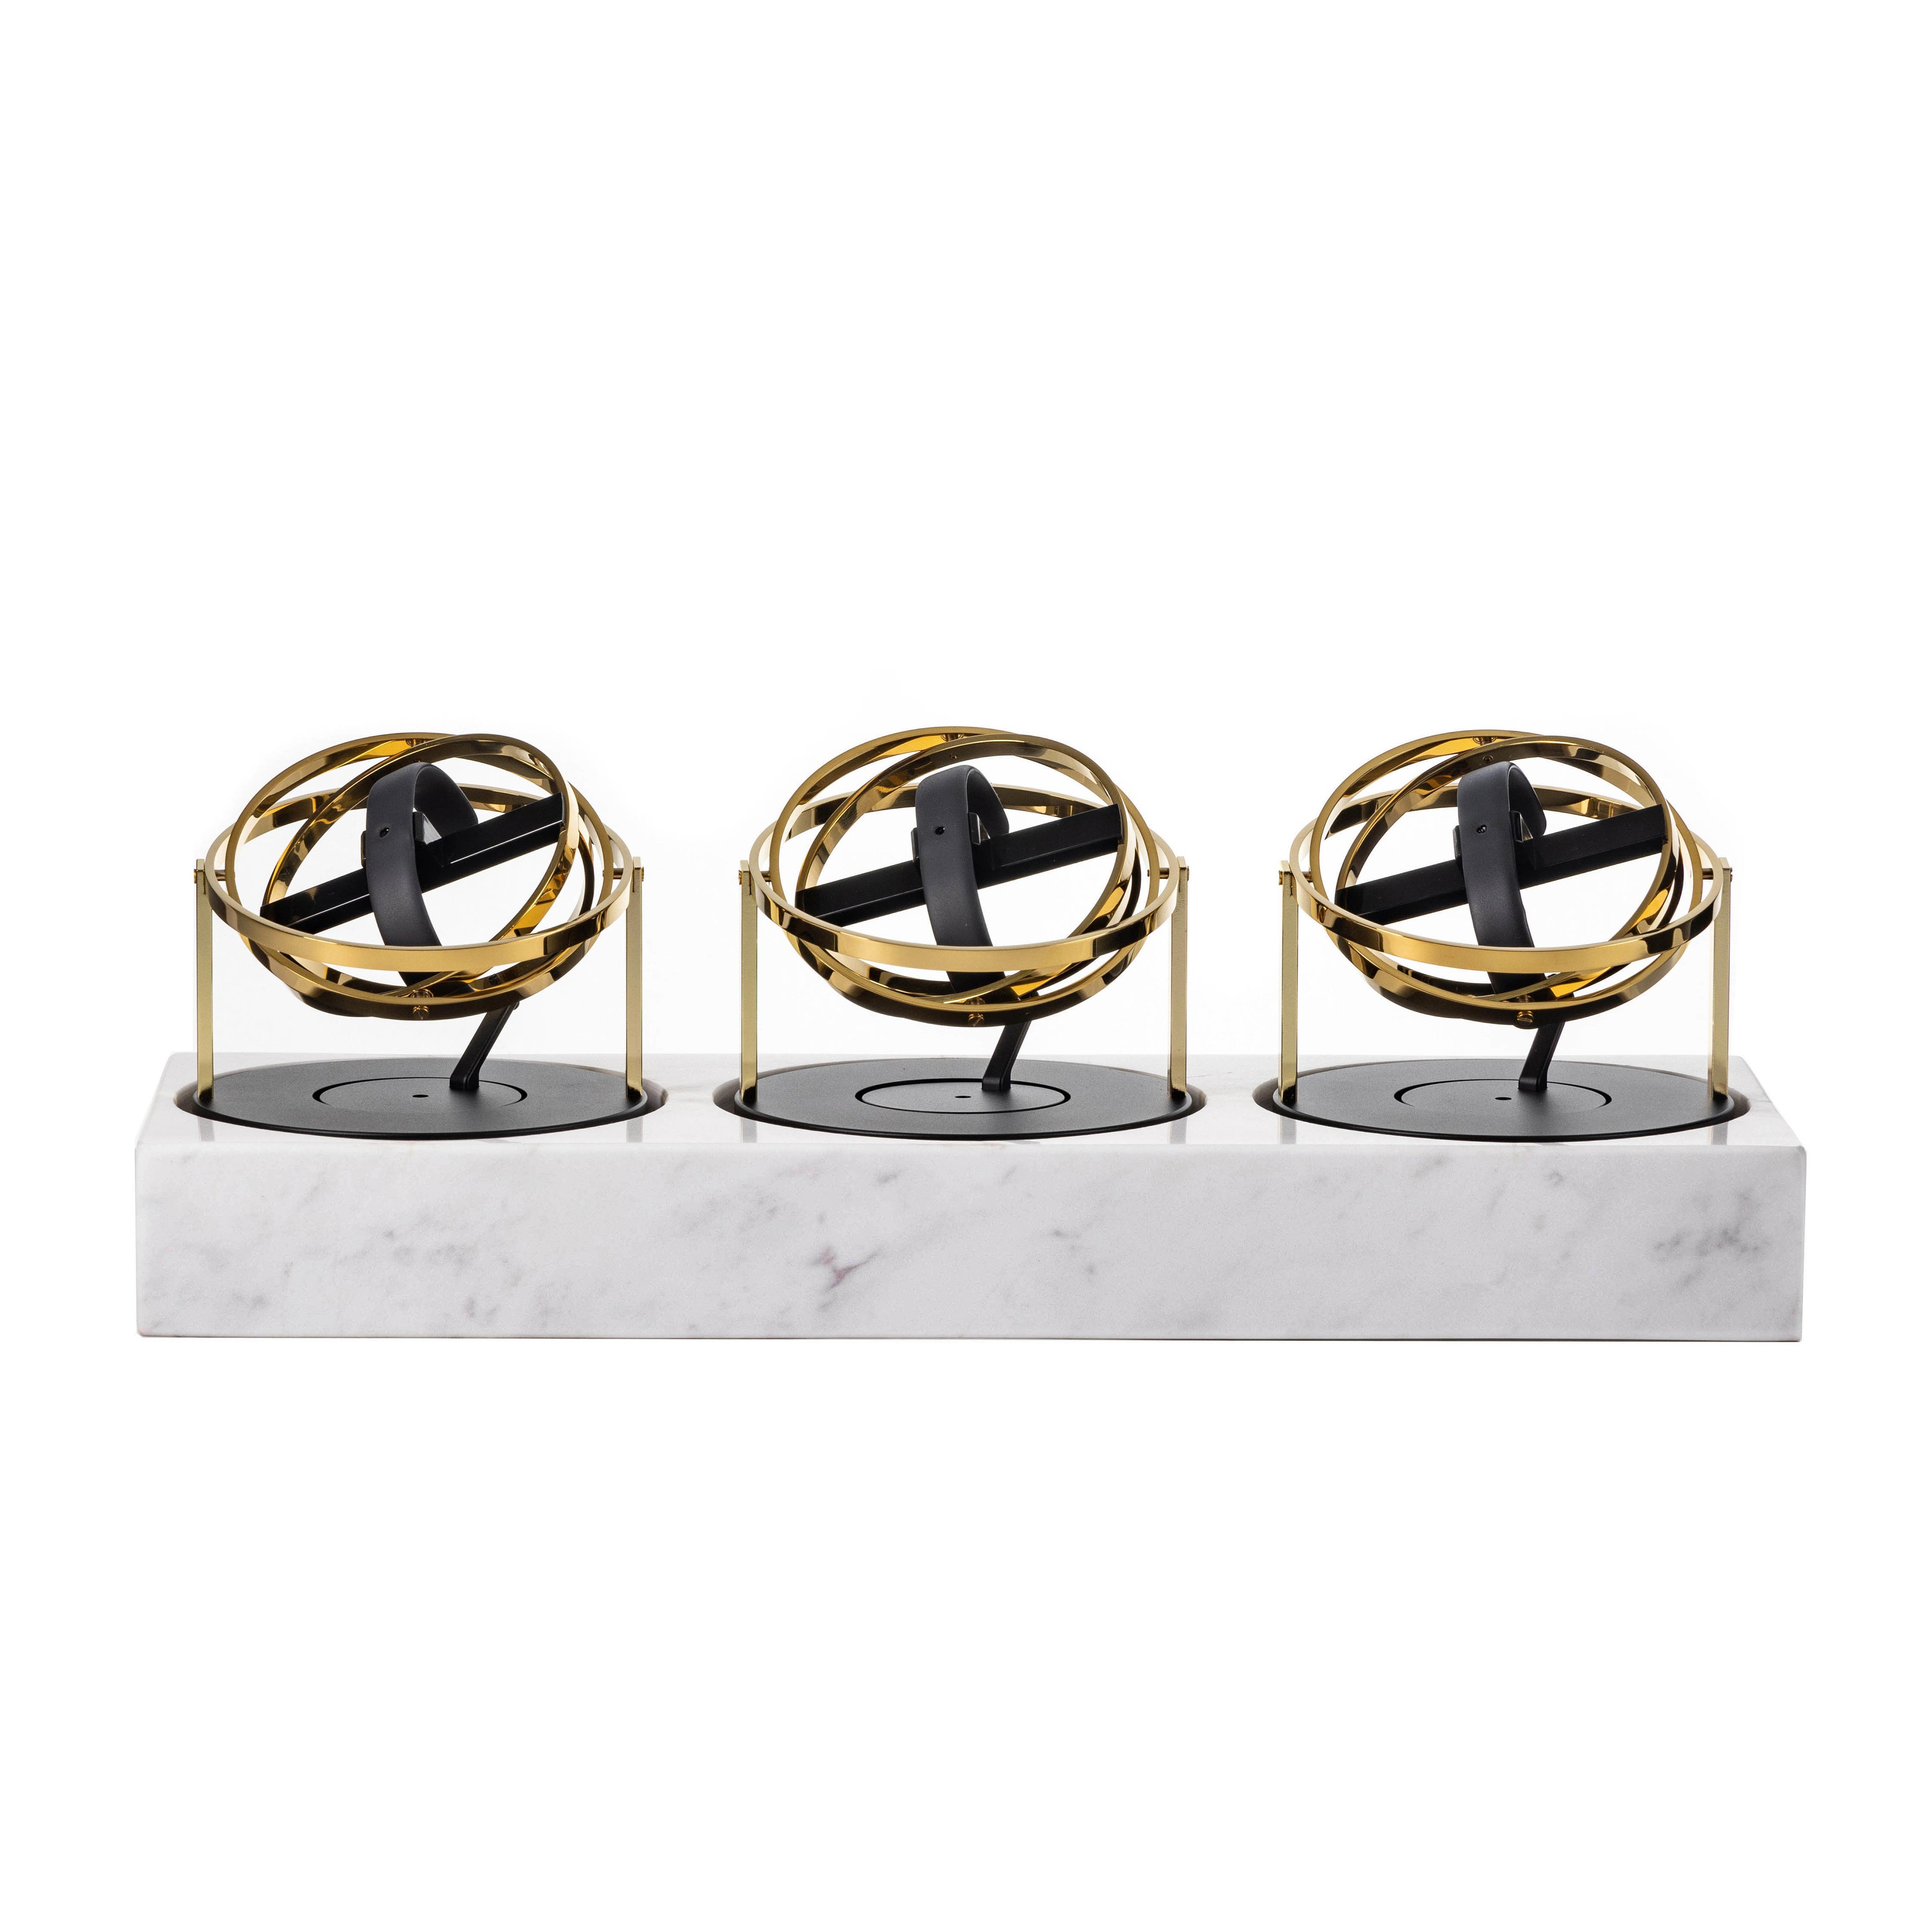 Triple Watch Winder - Astronomia X1 Gold - White Marble Edition